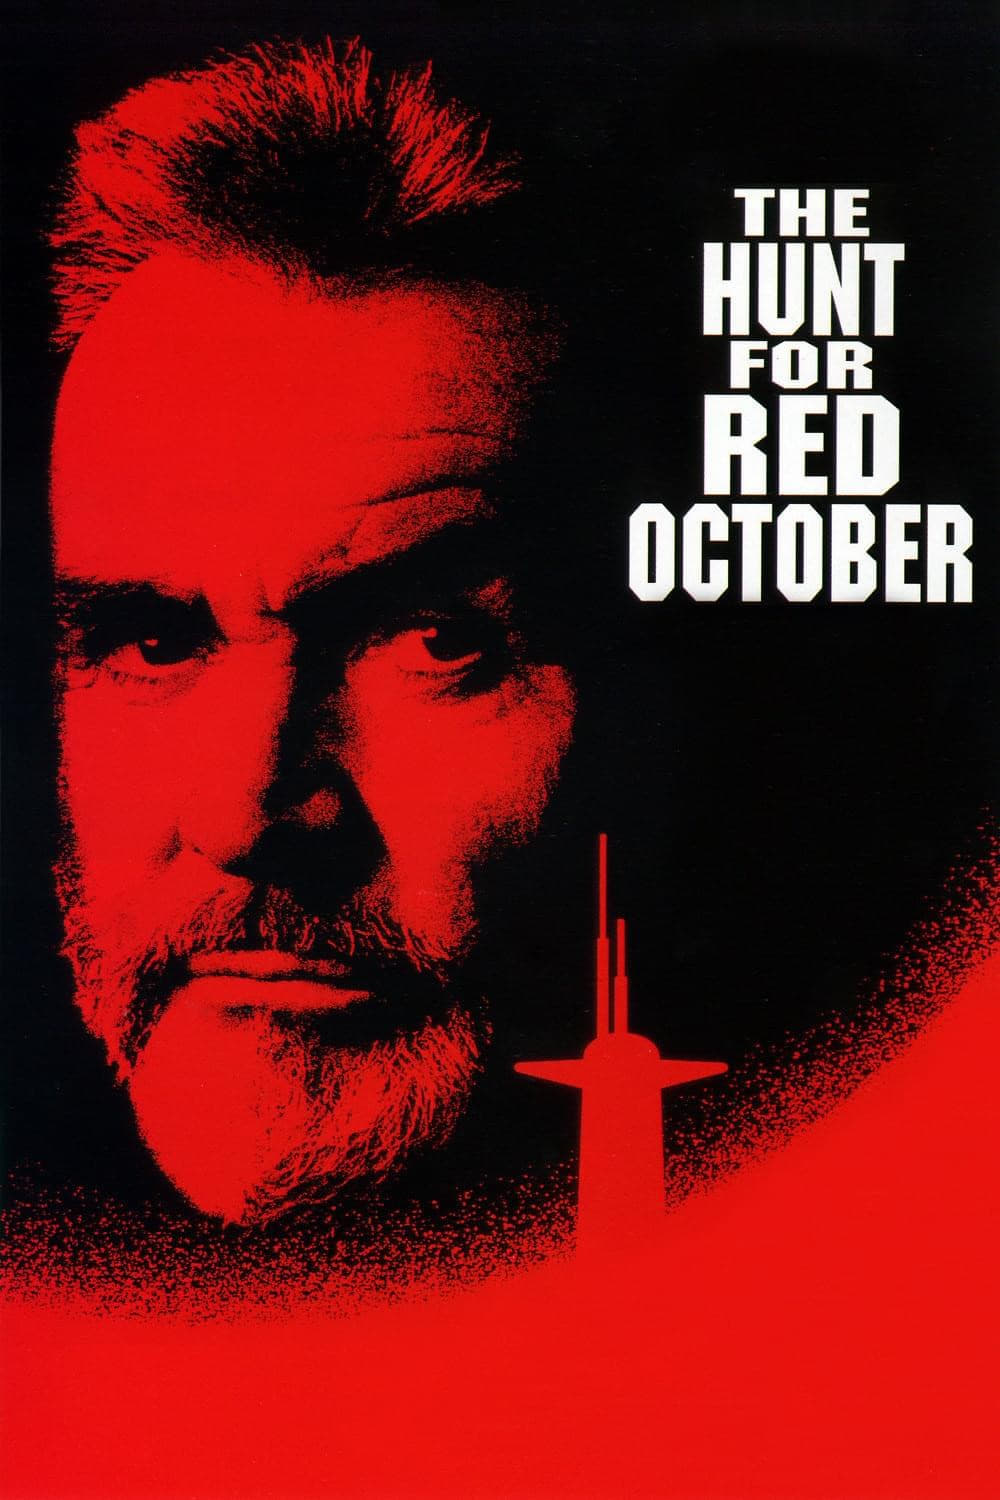 "The Hunt for Red October" poster